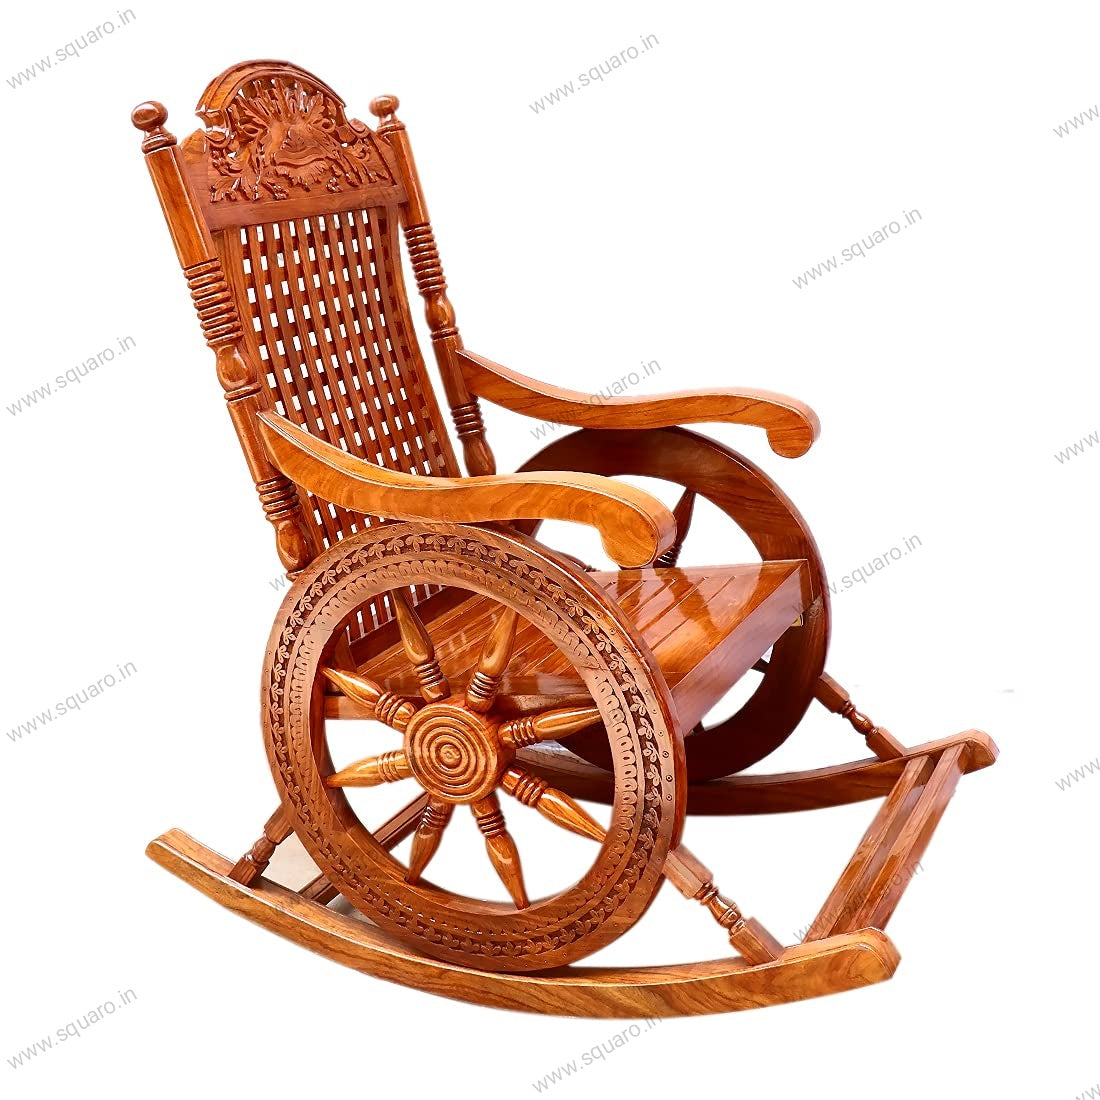 Sheesham Handcrafted Wooden Rocking Chair Wooden armrest Chair with Back Support for Living Room